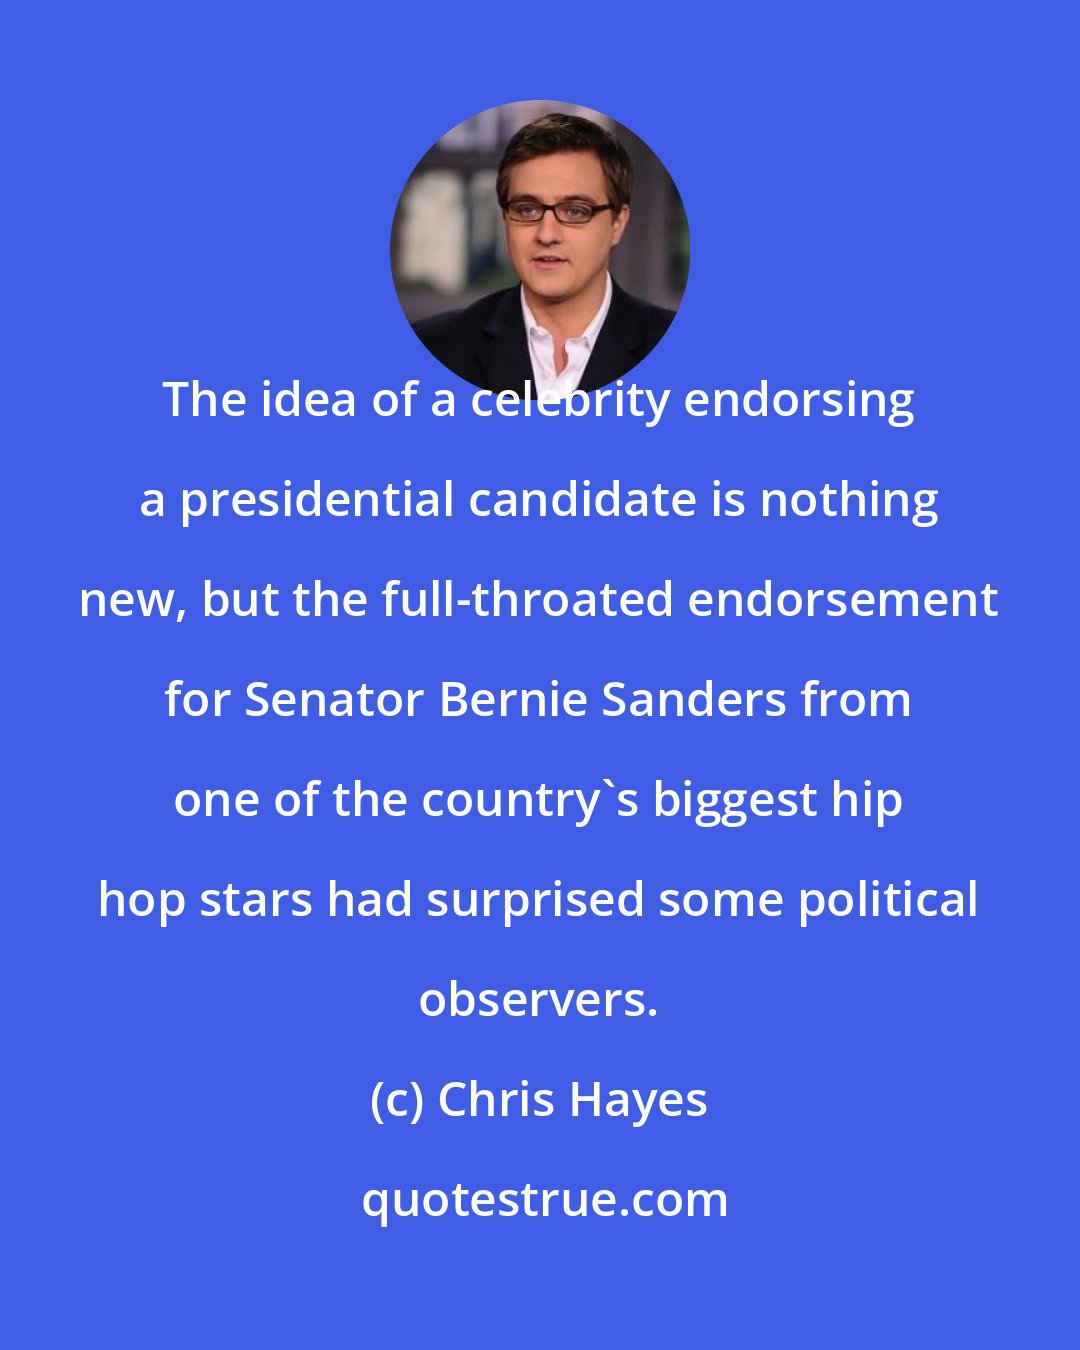 Chris Hayes: The idea of a celebrity endorsing a presidential candidate is nothing new, but the full-throated endorsement for Senator Bernie Sanders from one of the country`s biggest hip hop stars had surprised some political observers.